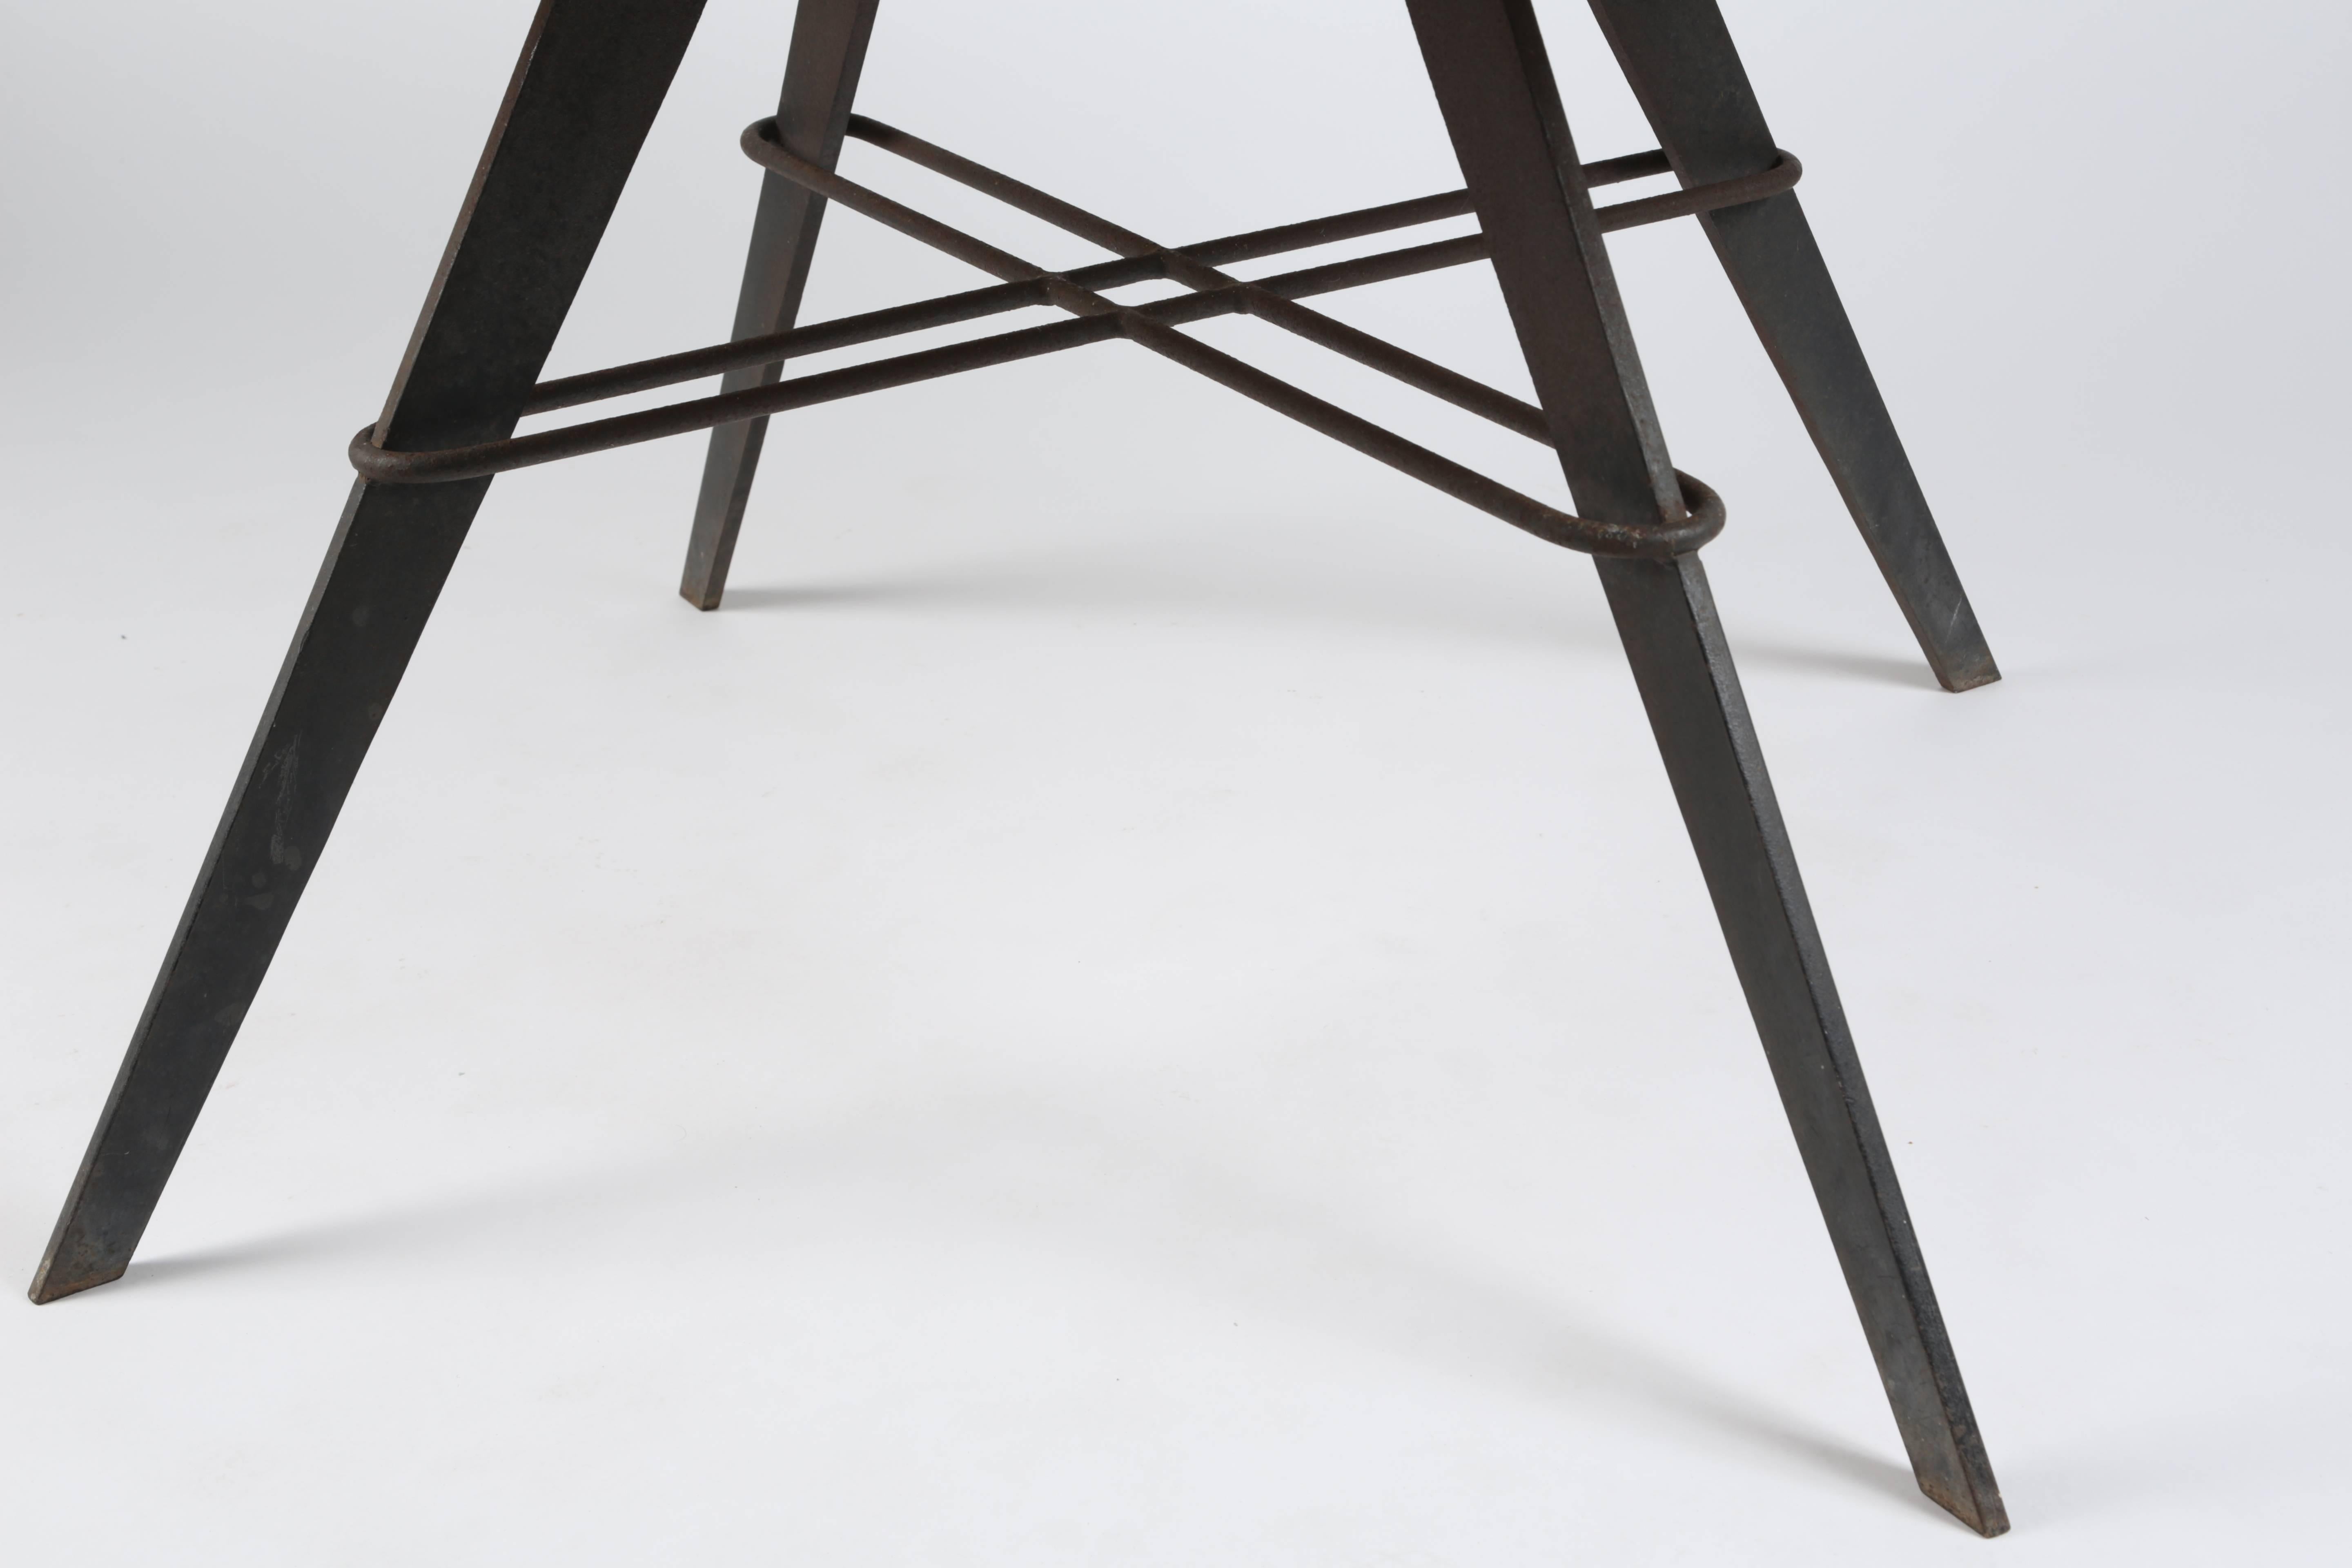 Iron Table with Marble Top by William 